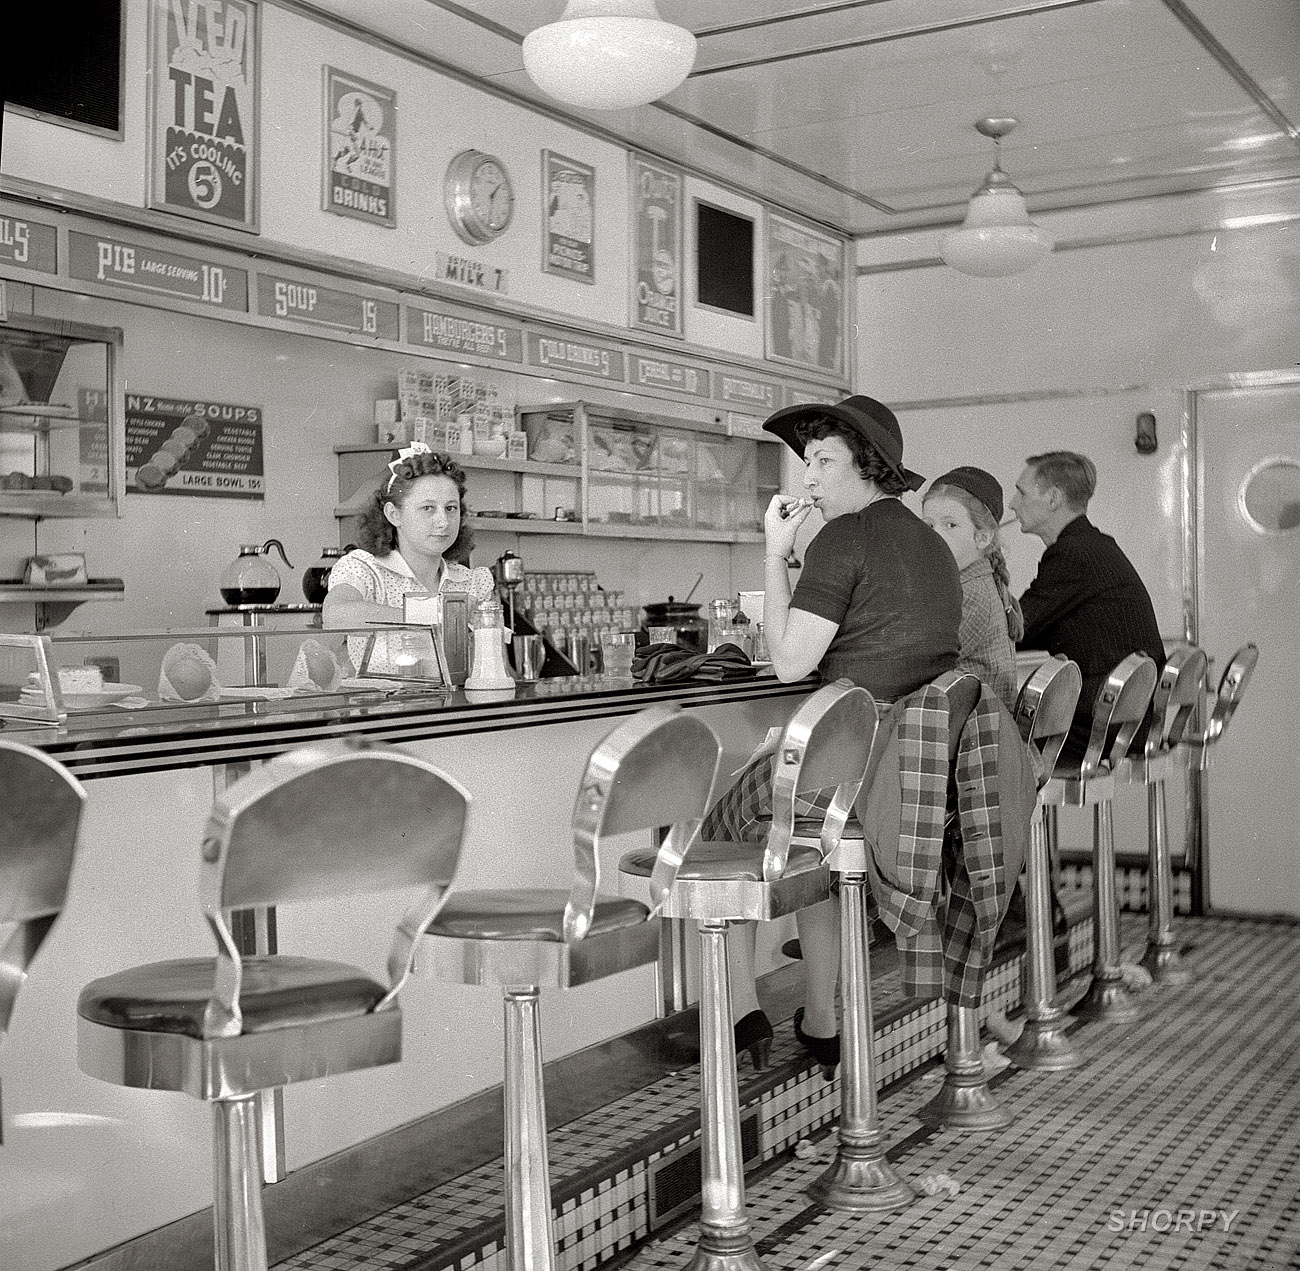 October 1941. "White Tower hamburger stand, the popular place in Amsterdam, New York." View full size. Medium-format nitrate negative by John Collier.